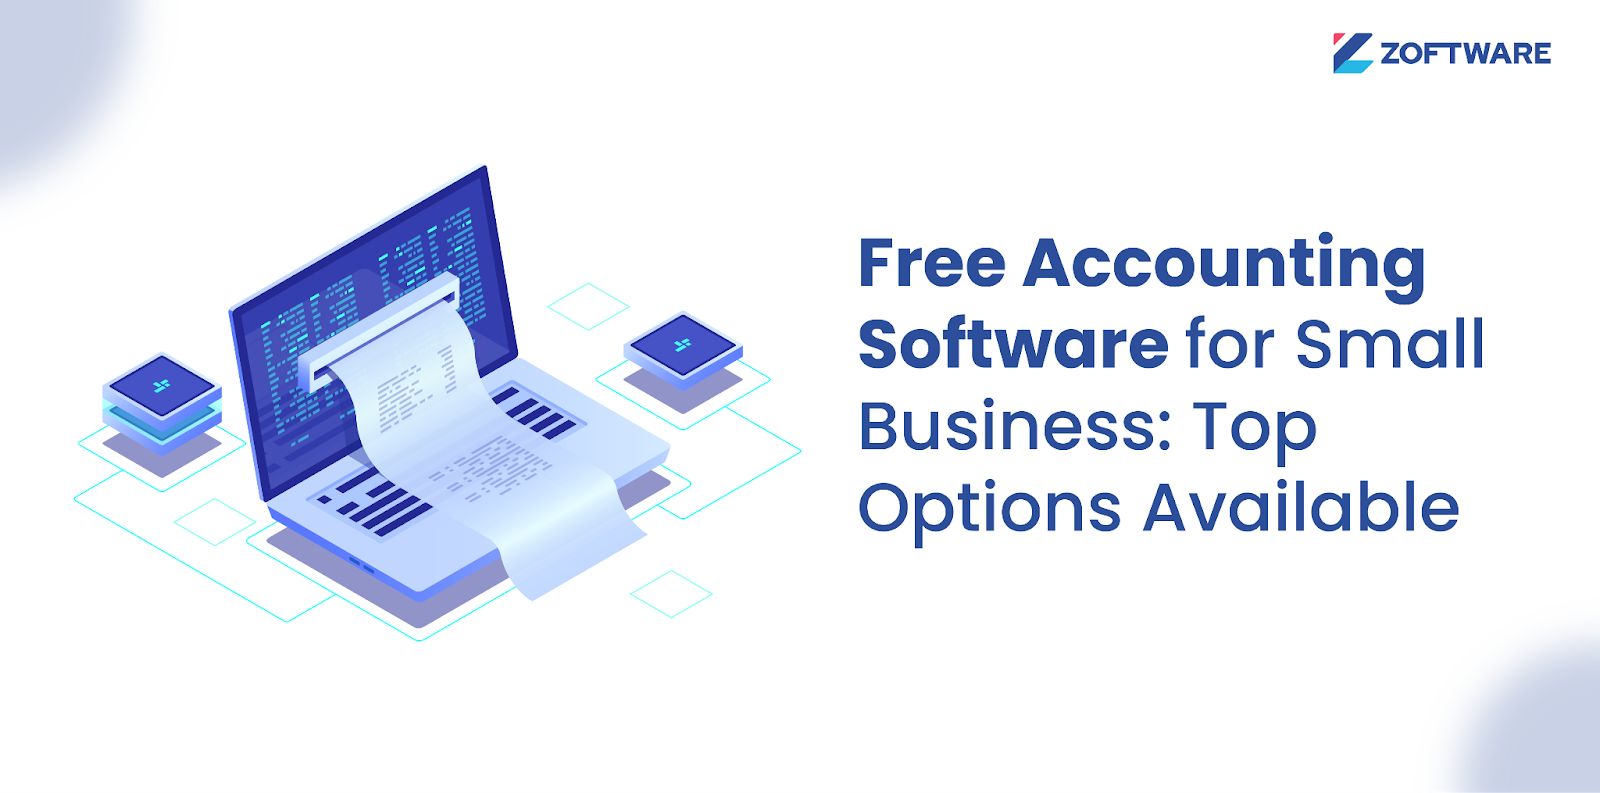 Free Accounting Software for Small Business: Top Options Available